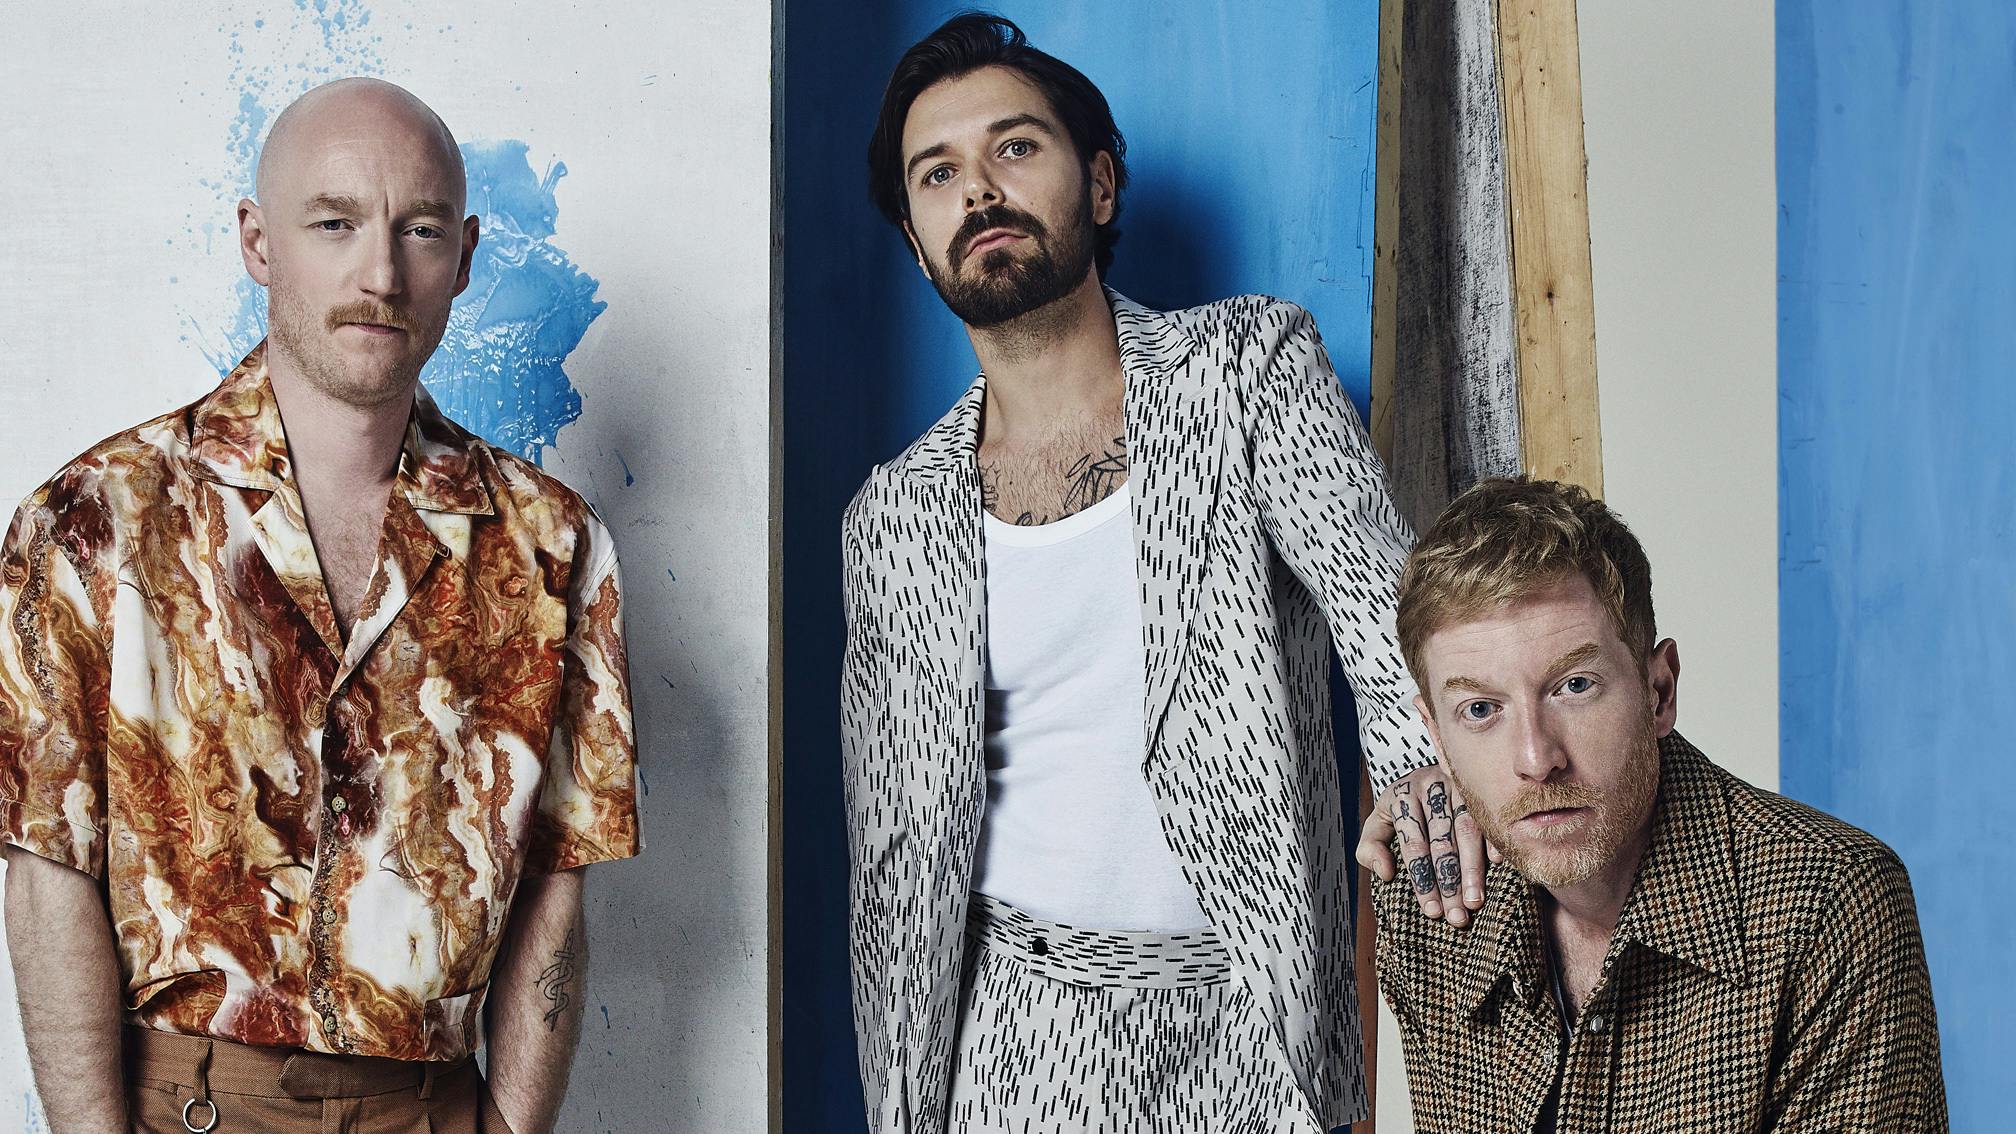 Biffy Clyro's Simon Neil: Finding Positivity At The End Of The World